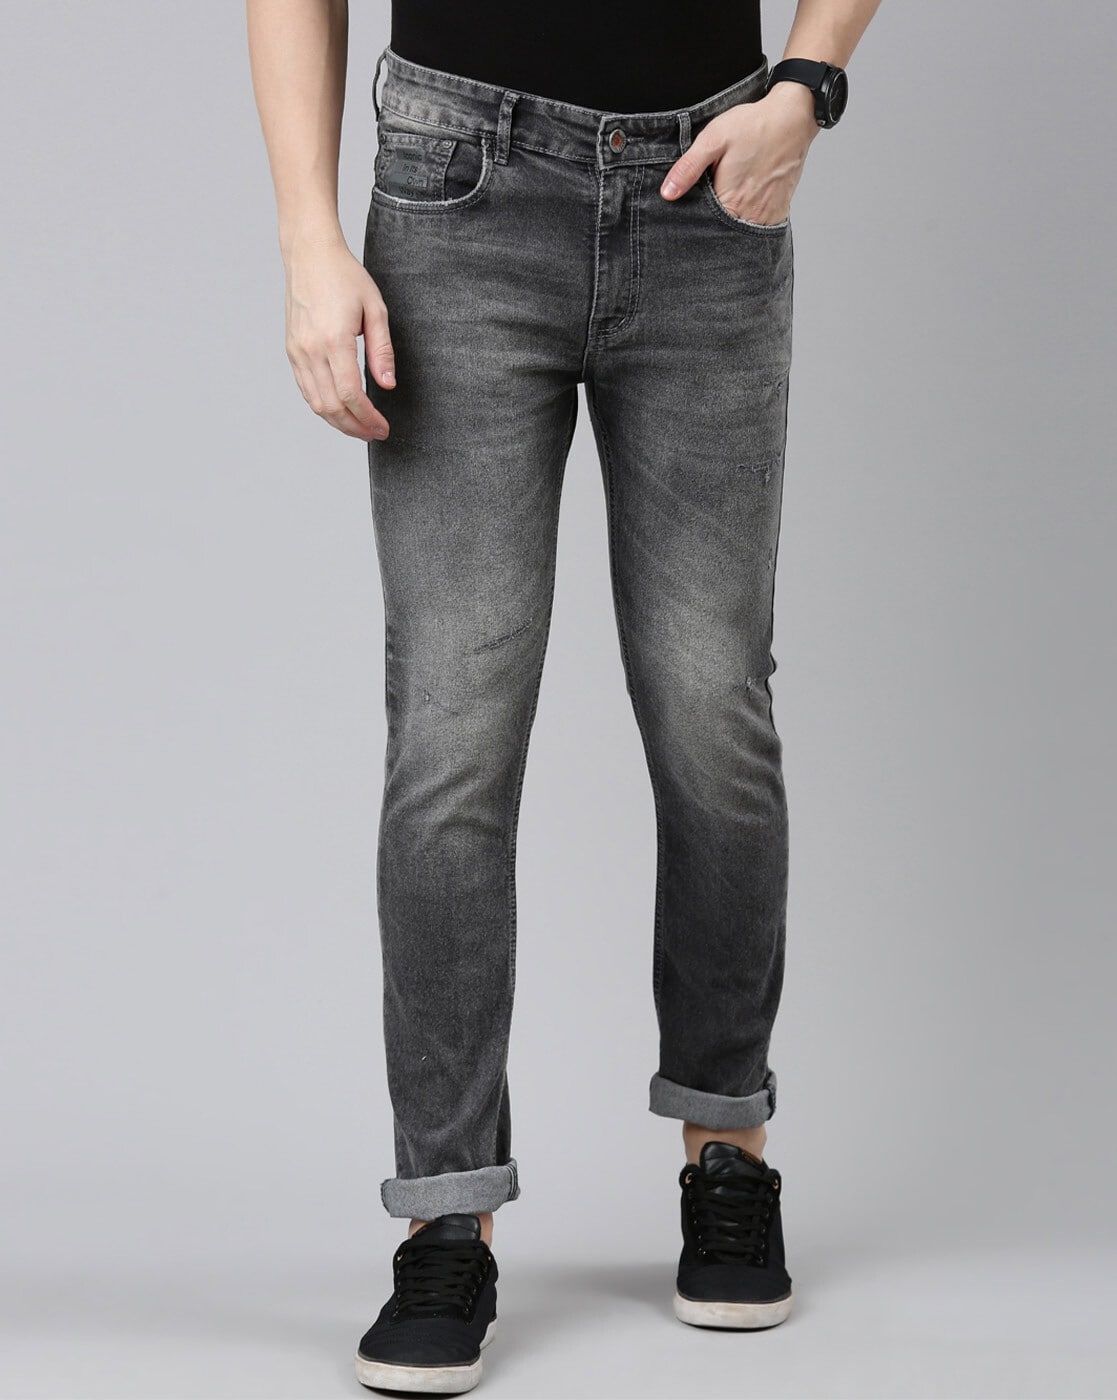 Buy Denim Jeans For Men In India at Best Prices | Turtle